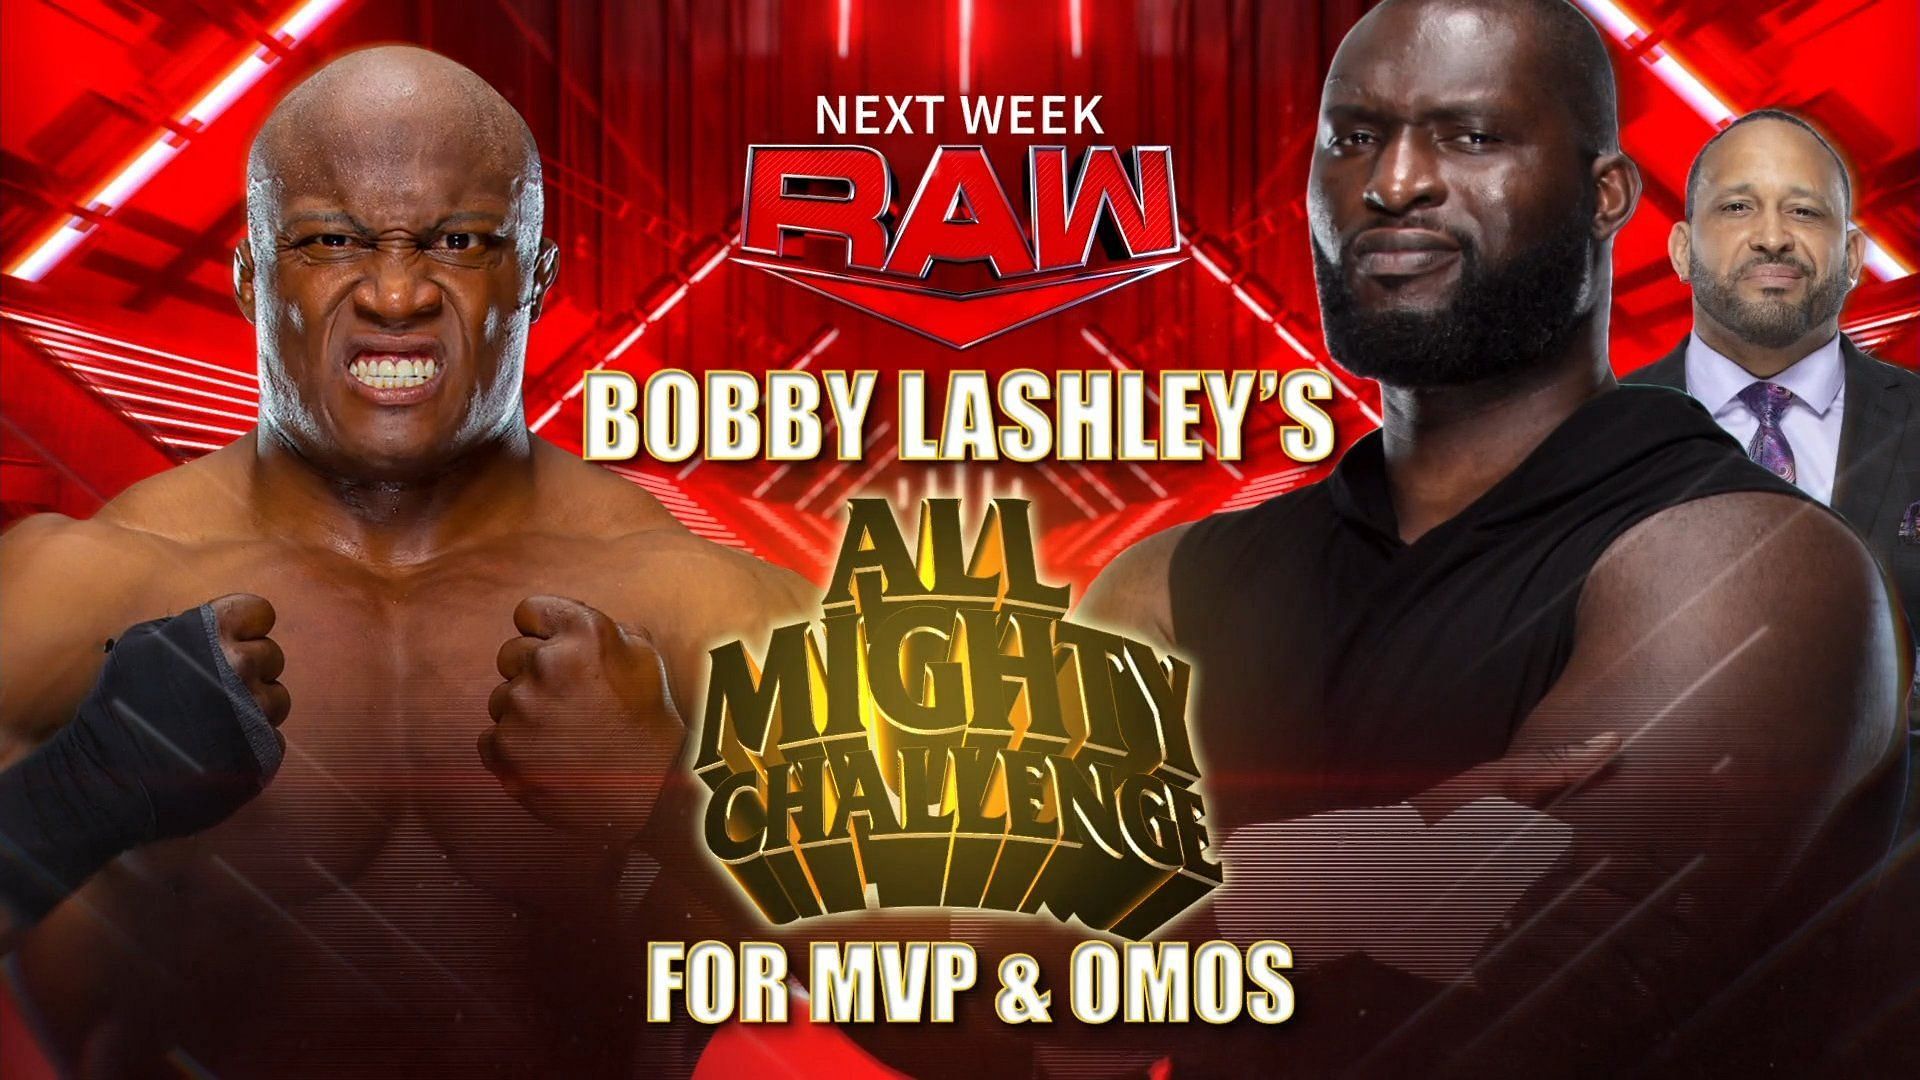 The All Mighty Challenge will take place next week on RAW